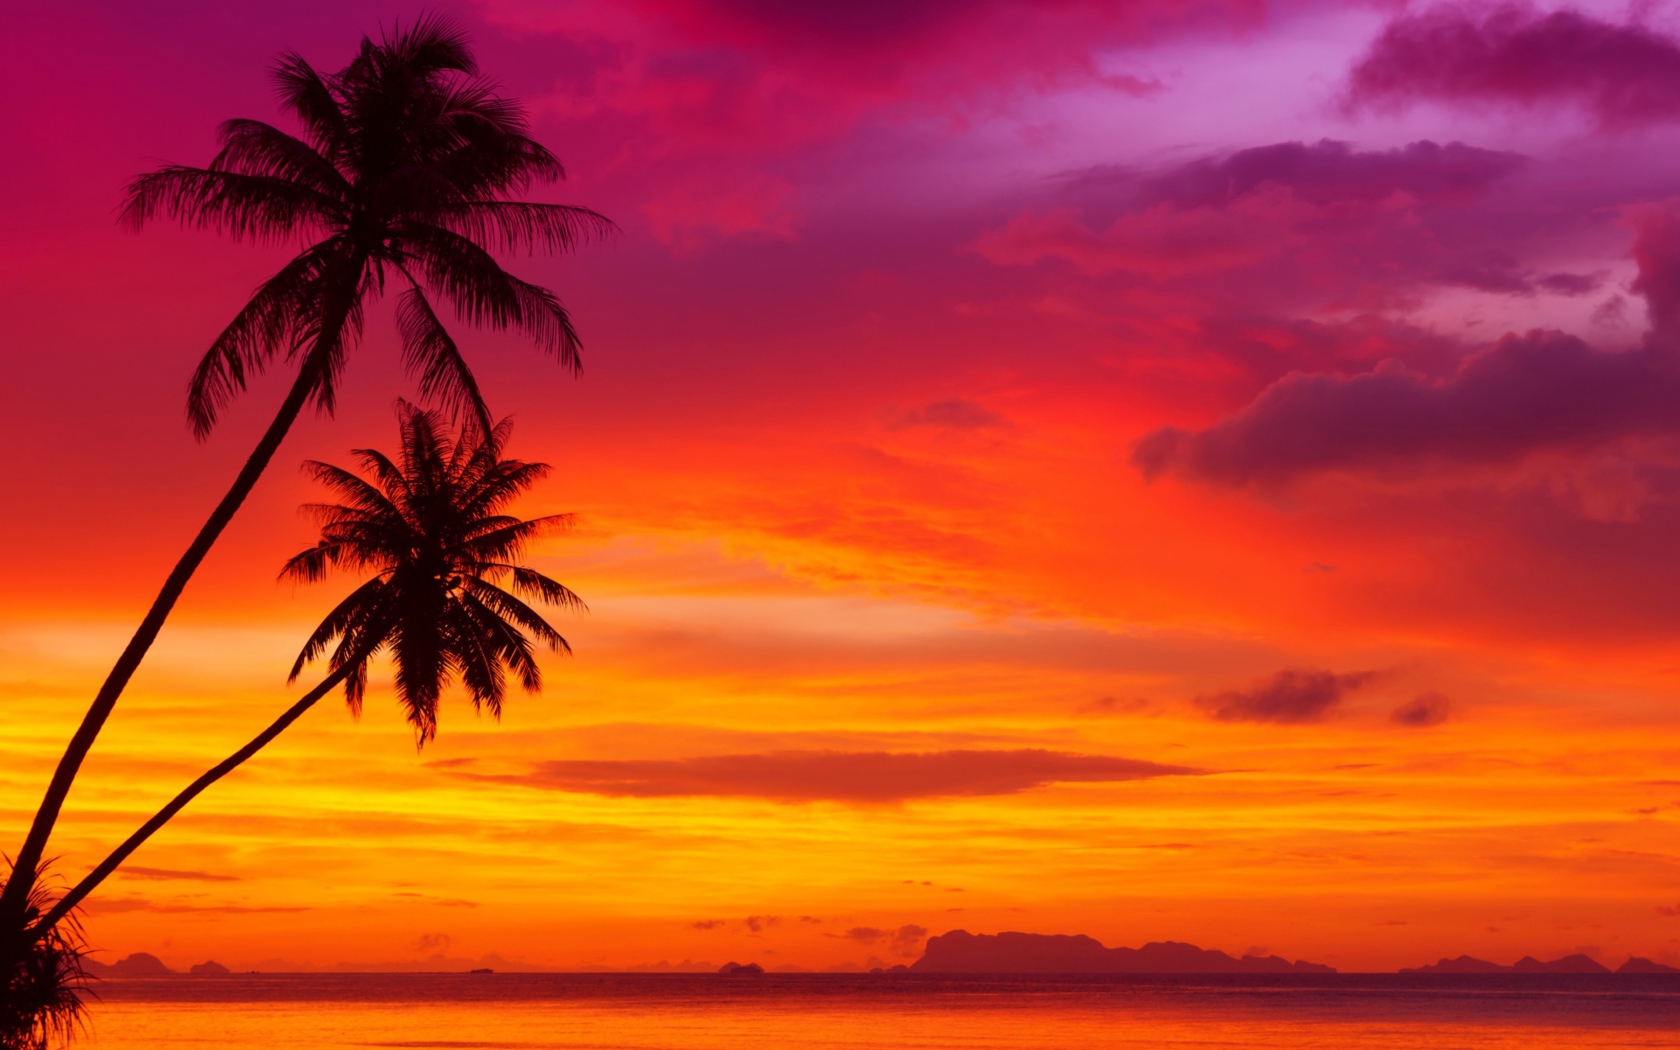 Amazing Pink And Orange Tropical Sunset wallpaper 1680x1050